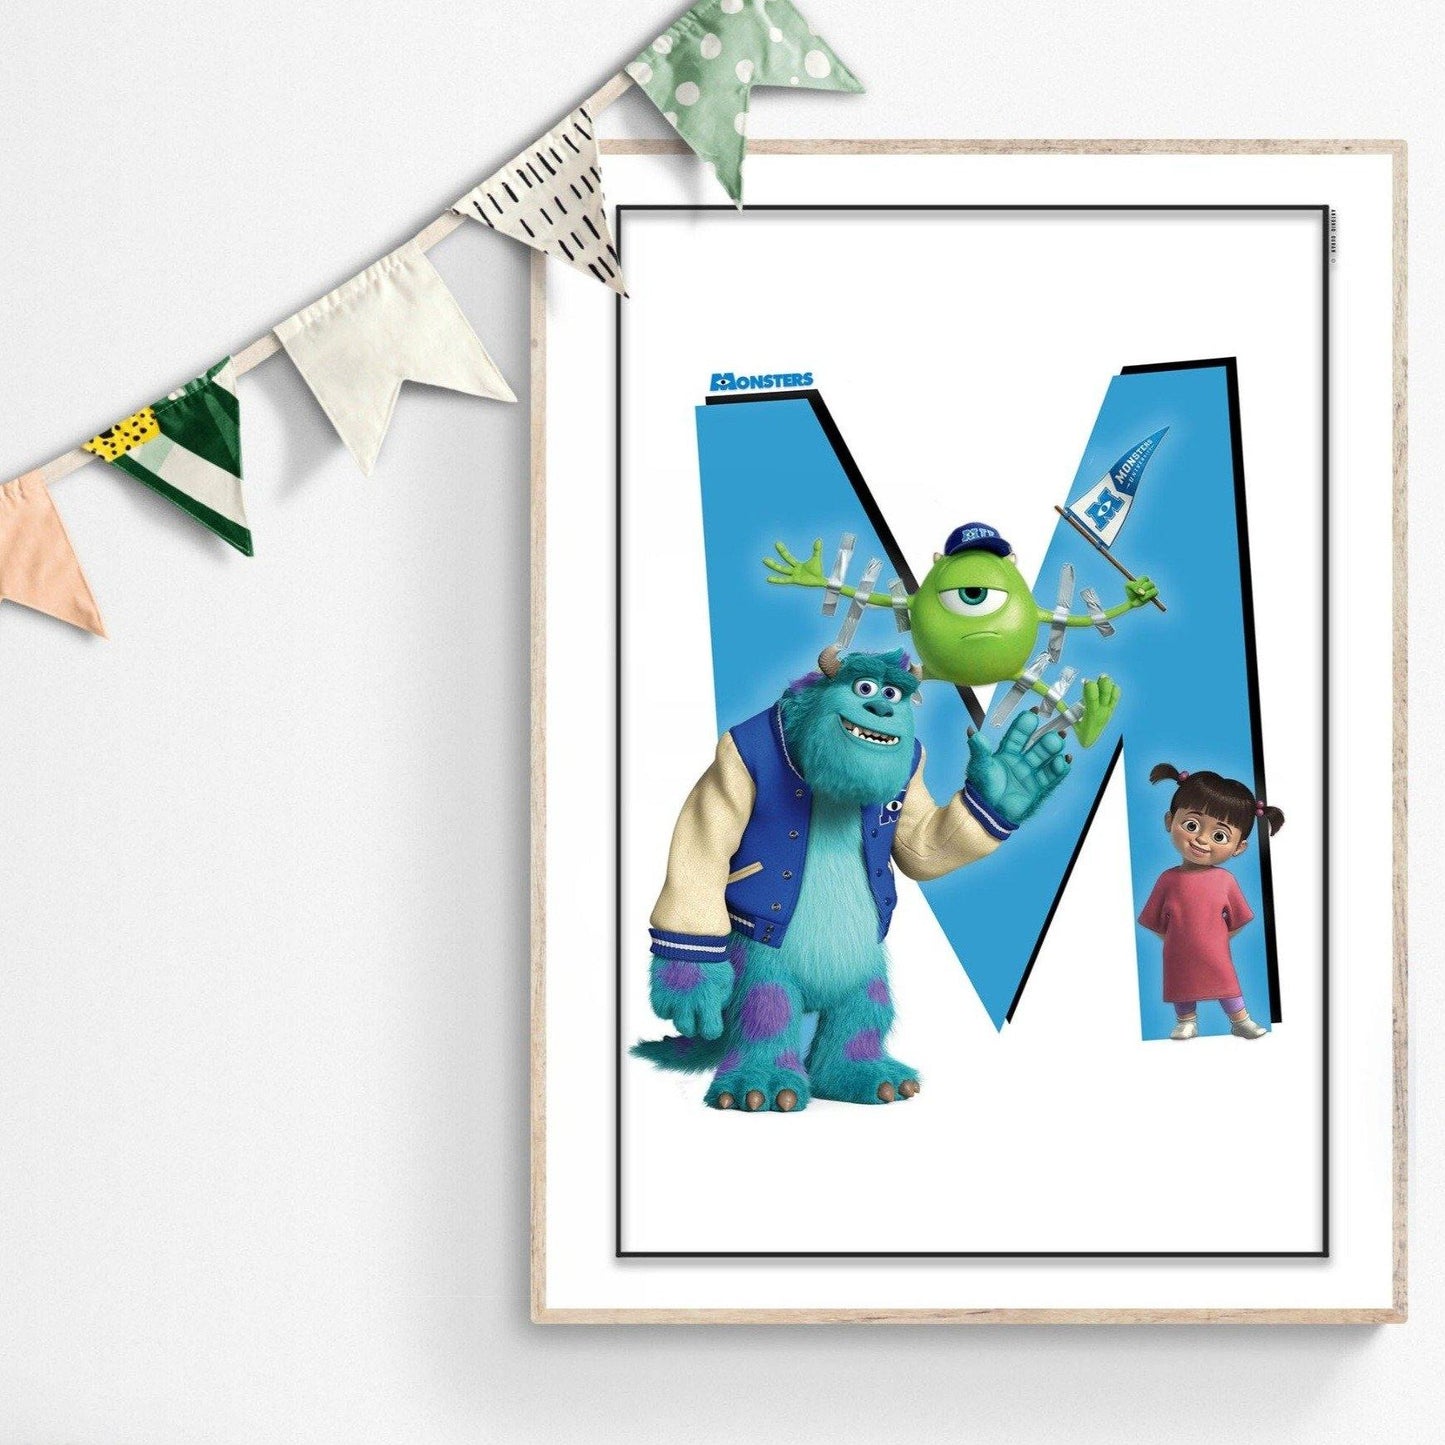 Introducing the Monsters Inc Poster! This vibrant wall print is sure to add a touch of Disney magic to your home. Featuring lovable characters from the classic Disney animated movie, this poster promises eye-catching design and colour that'll bring your walls to life. So, don't monster around—bring the magical world of Monsters Inc into your home today! 98types